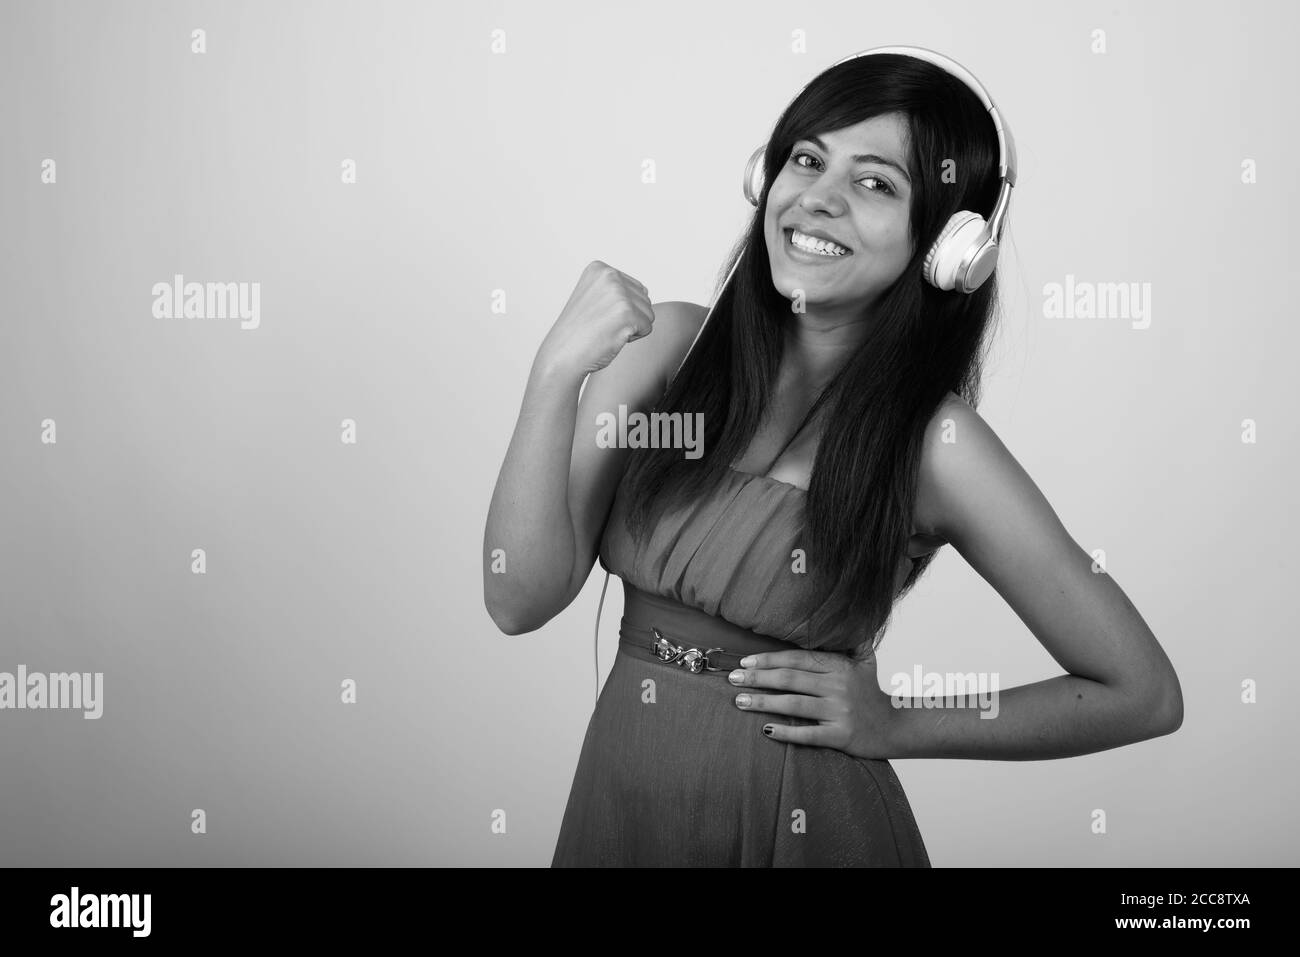 Studio shot of young happy Persian woman smiling while looking motivated and listening to music against gray background Stock Photo